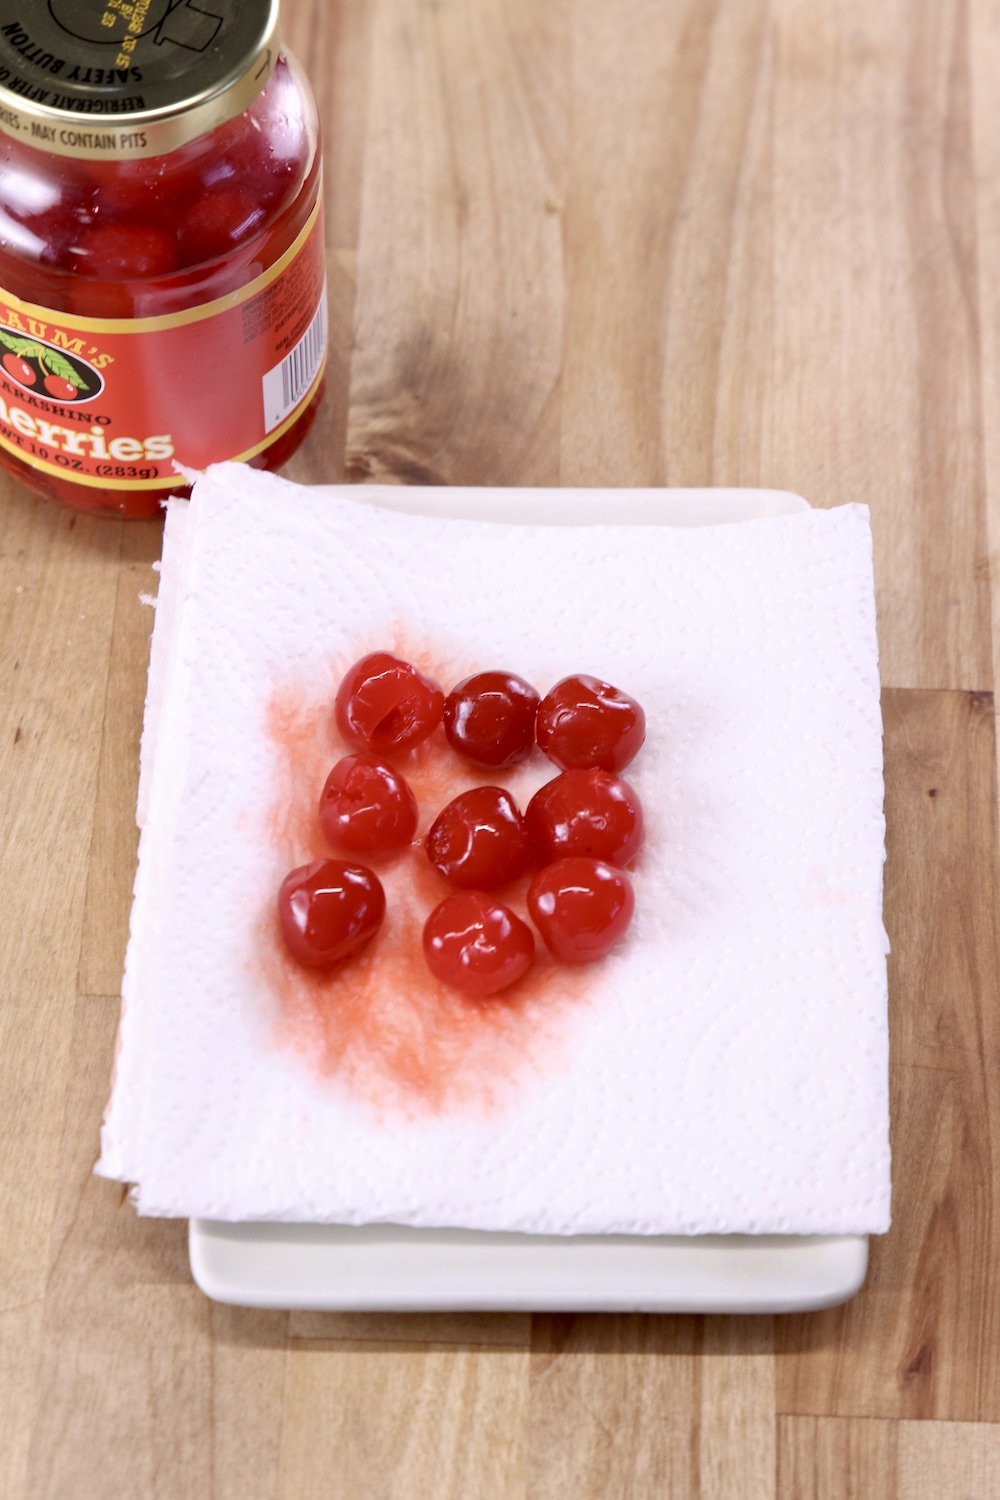 maraschino cherries draining on a paper towel with jar of cherries to the side